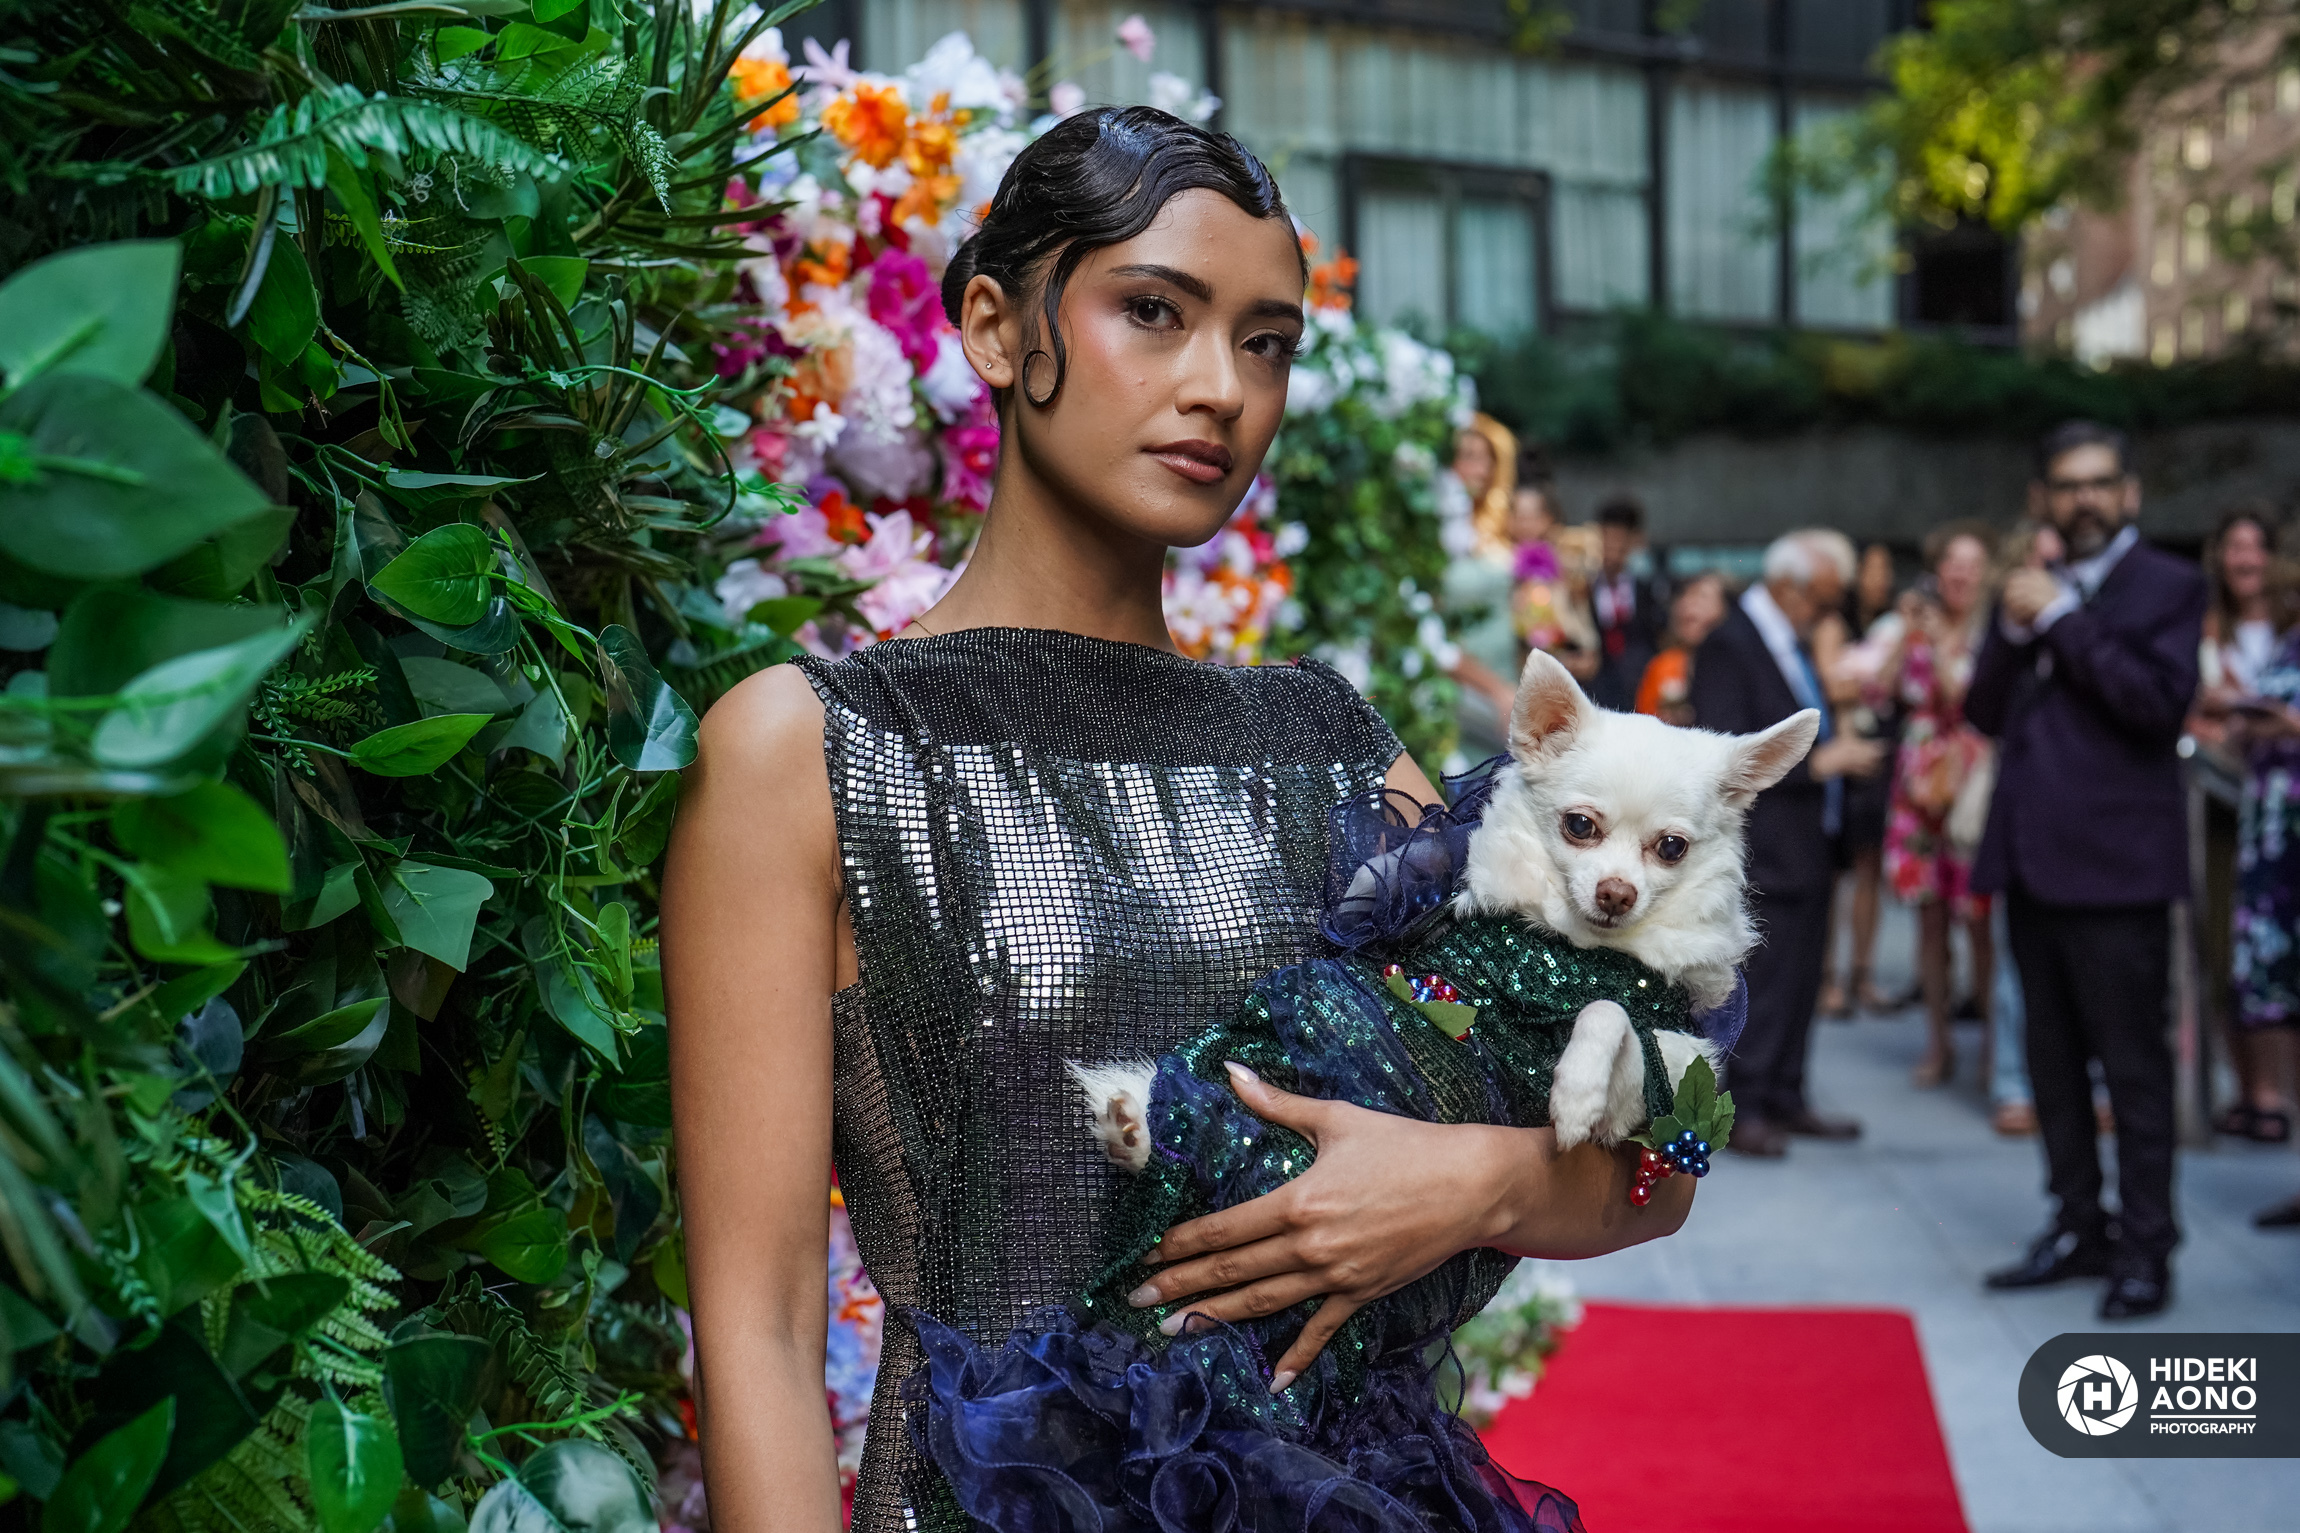 A model holds a dog dressed up in a blue dress.